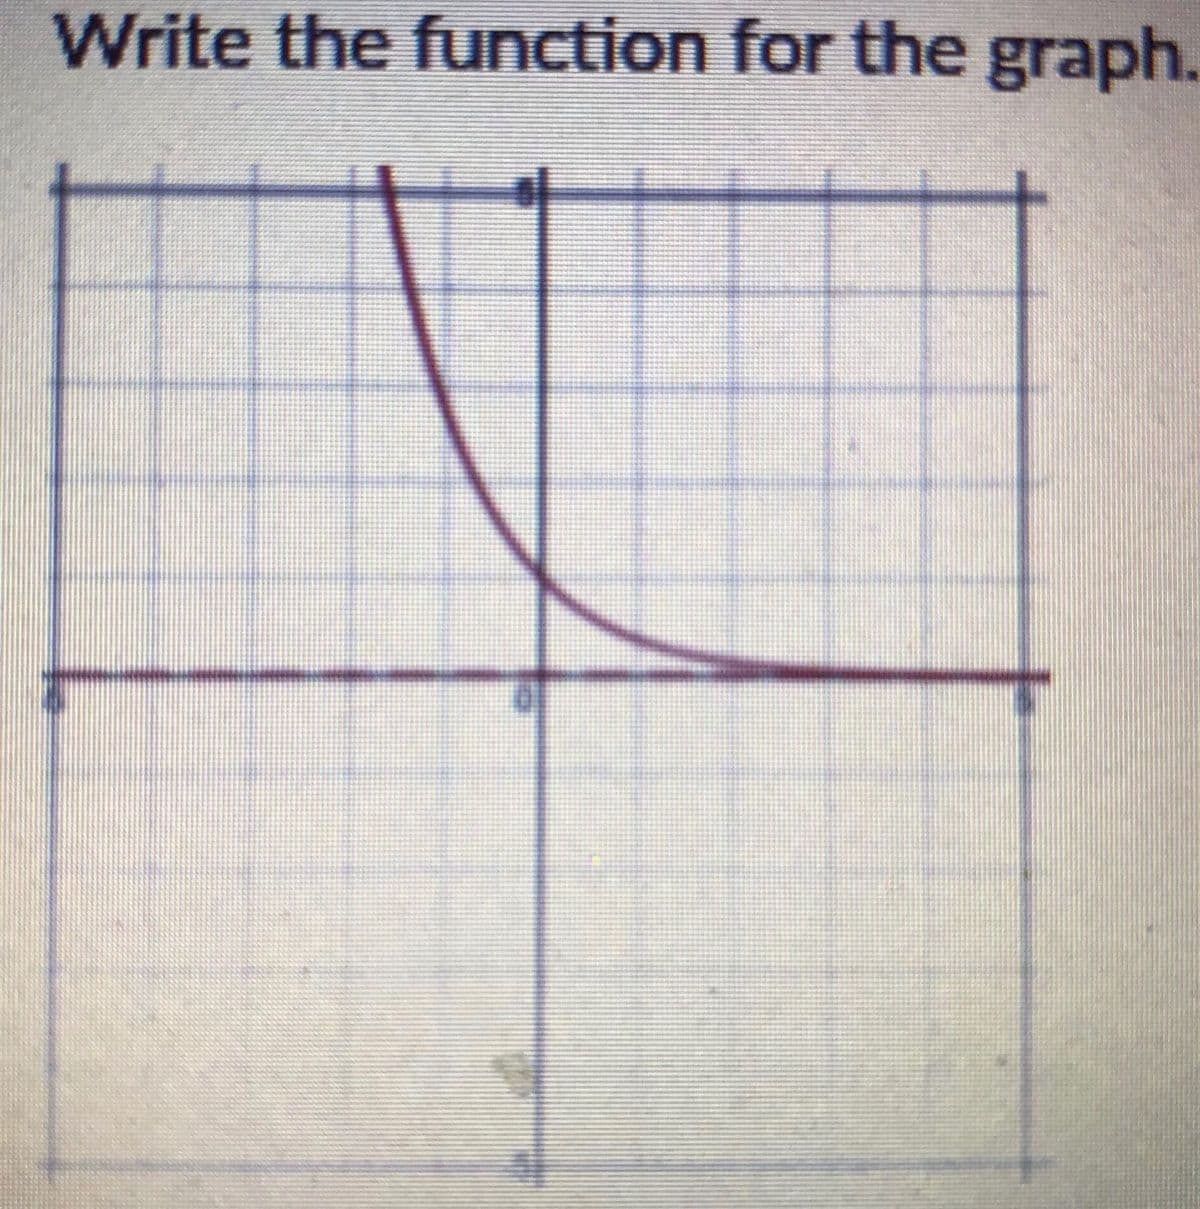 Write the function for the graph.
